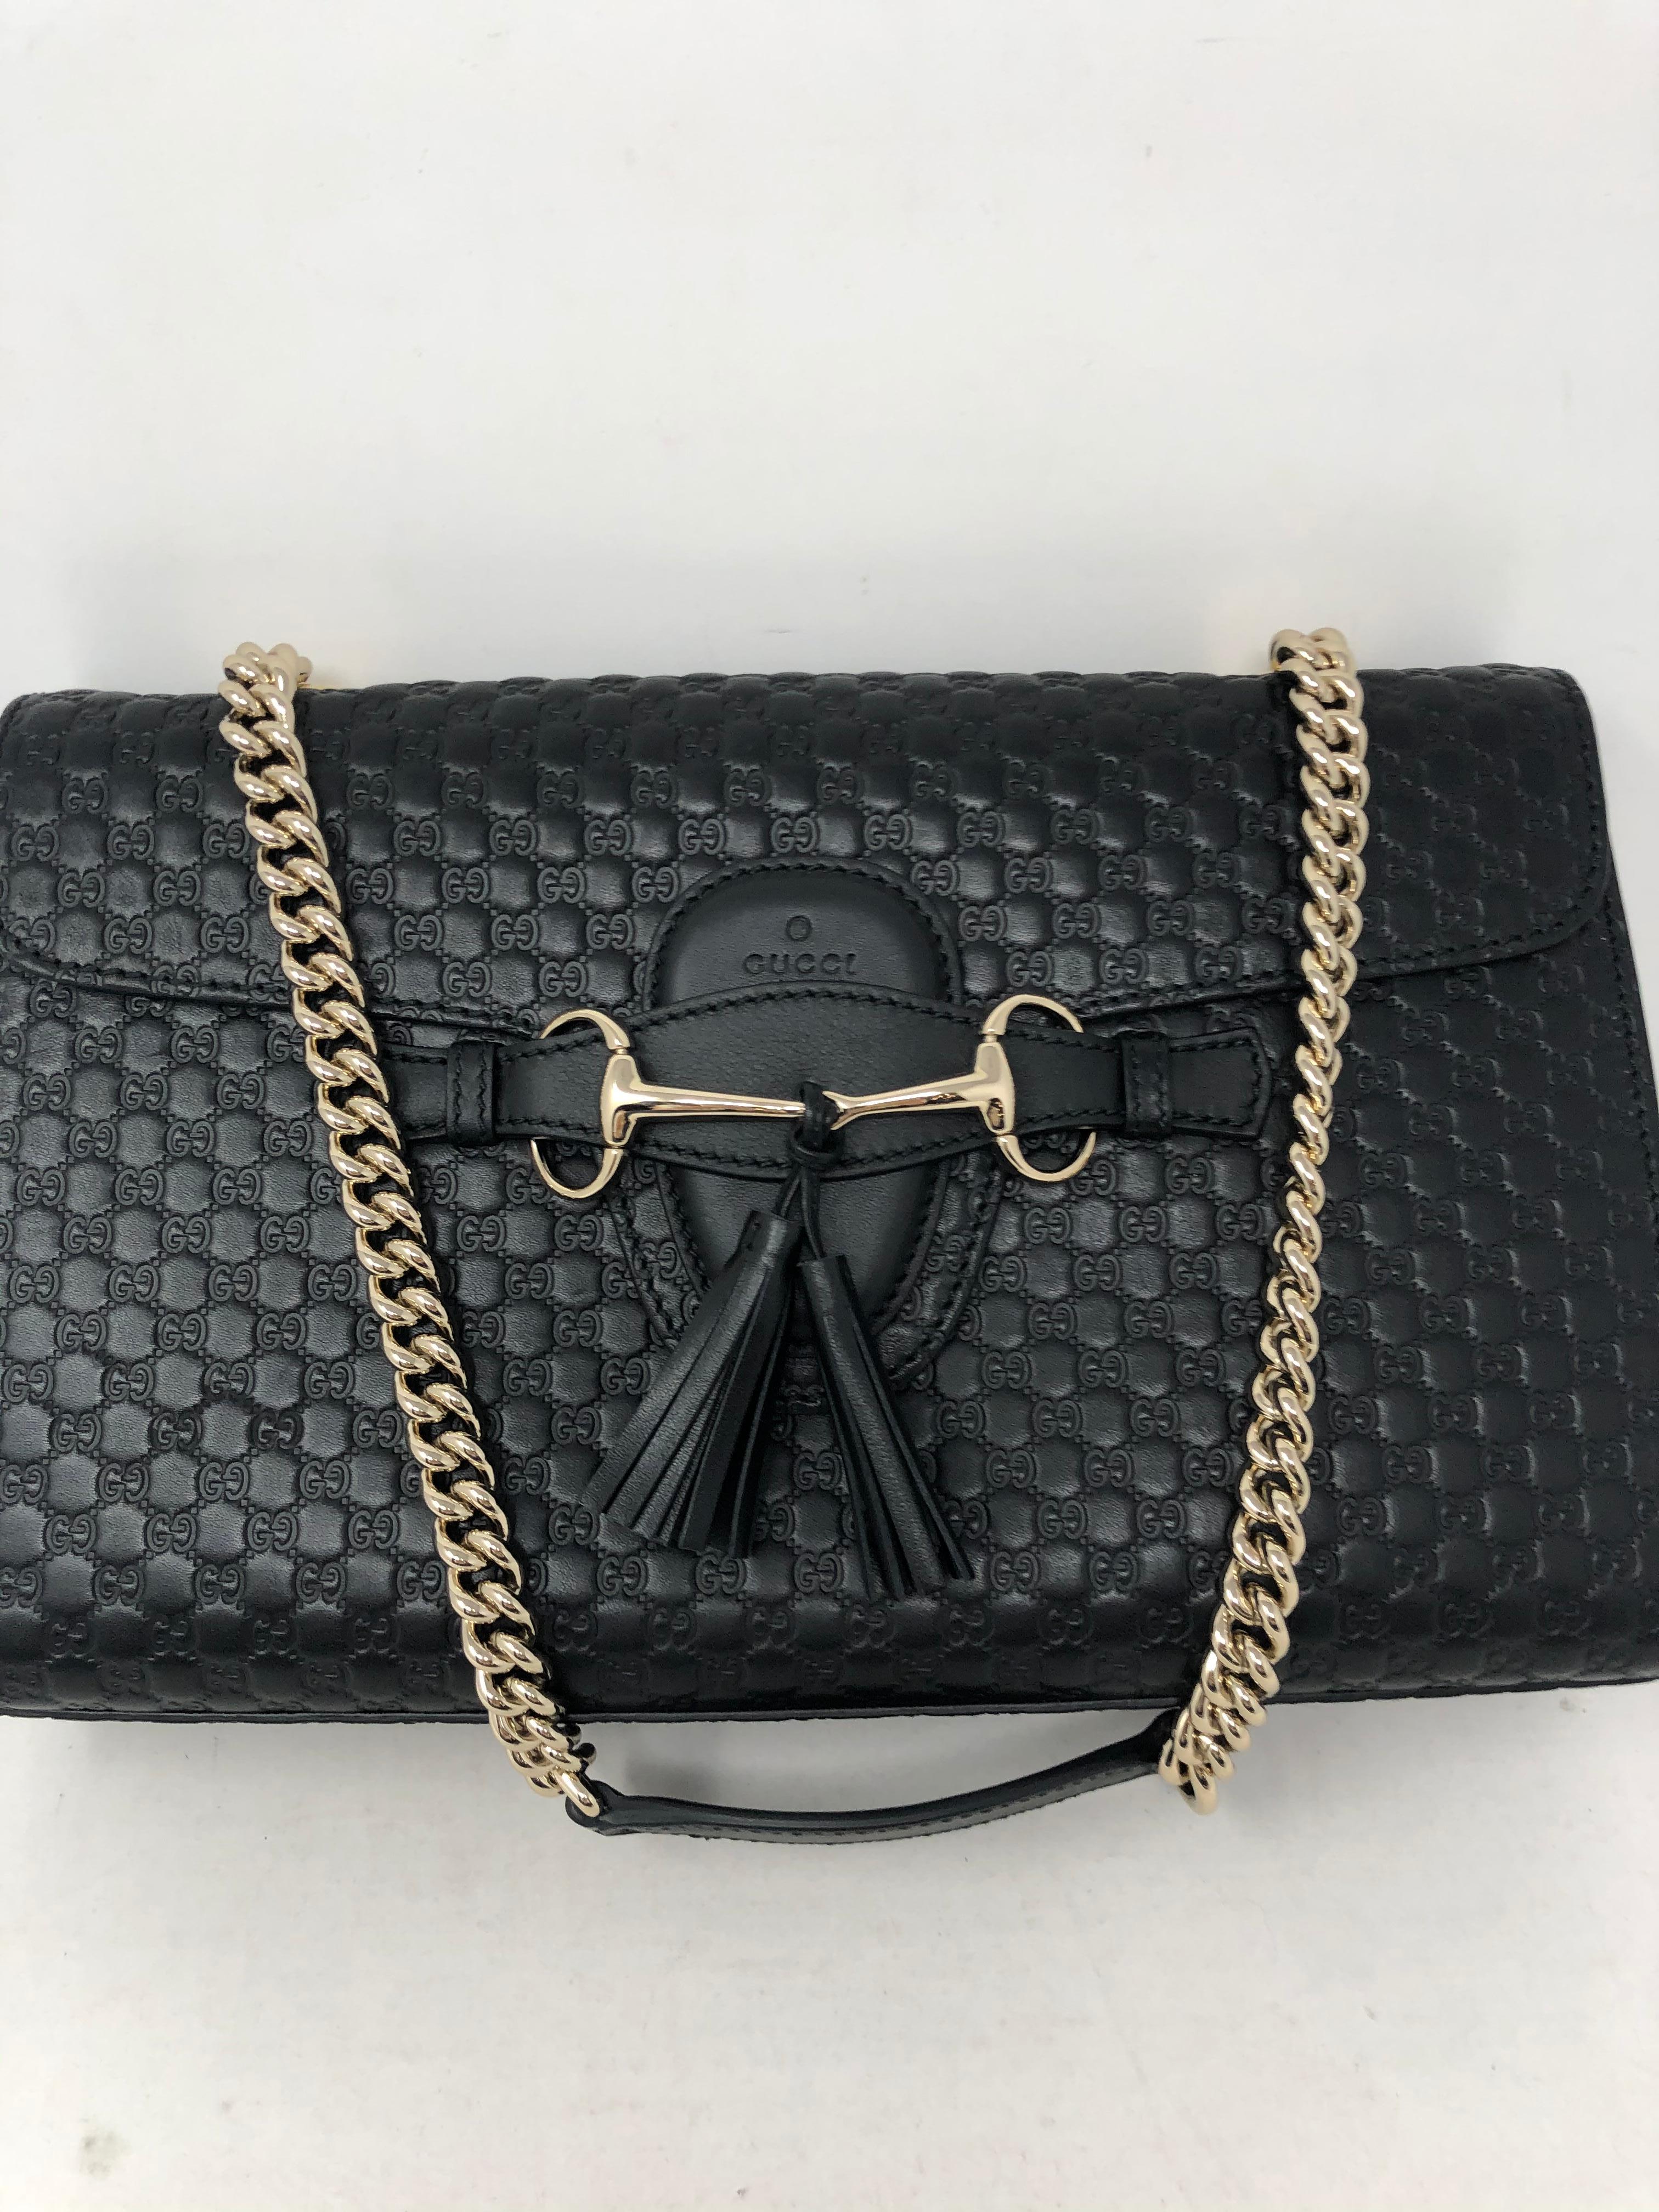 Gucci Embossed Monogram Black Leather Clutch/ shoulder bag. Beautiful black leather. New conditon. Never used. Gold hardware. Strap can be worn as a shoulder bag. Gold horsebit closure. Classy bag. Limited and rare style. Guaranteed authentic. 